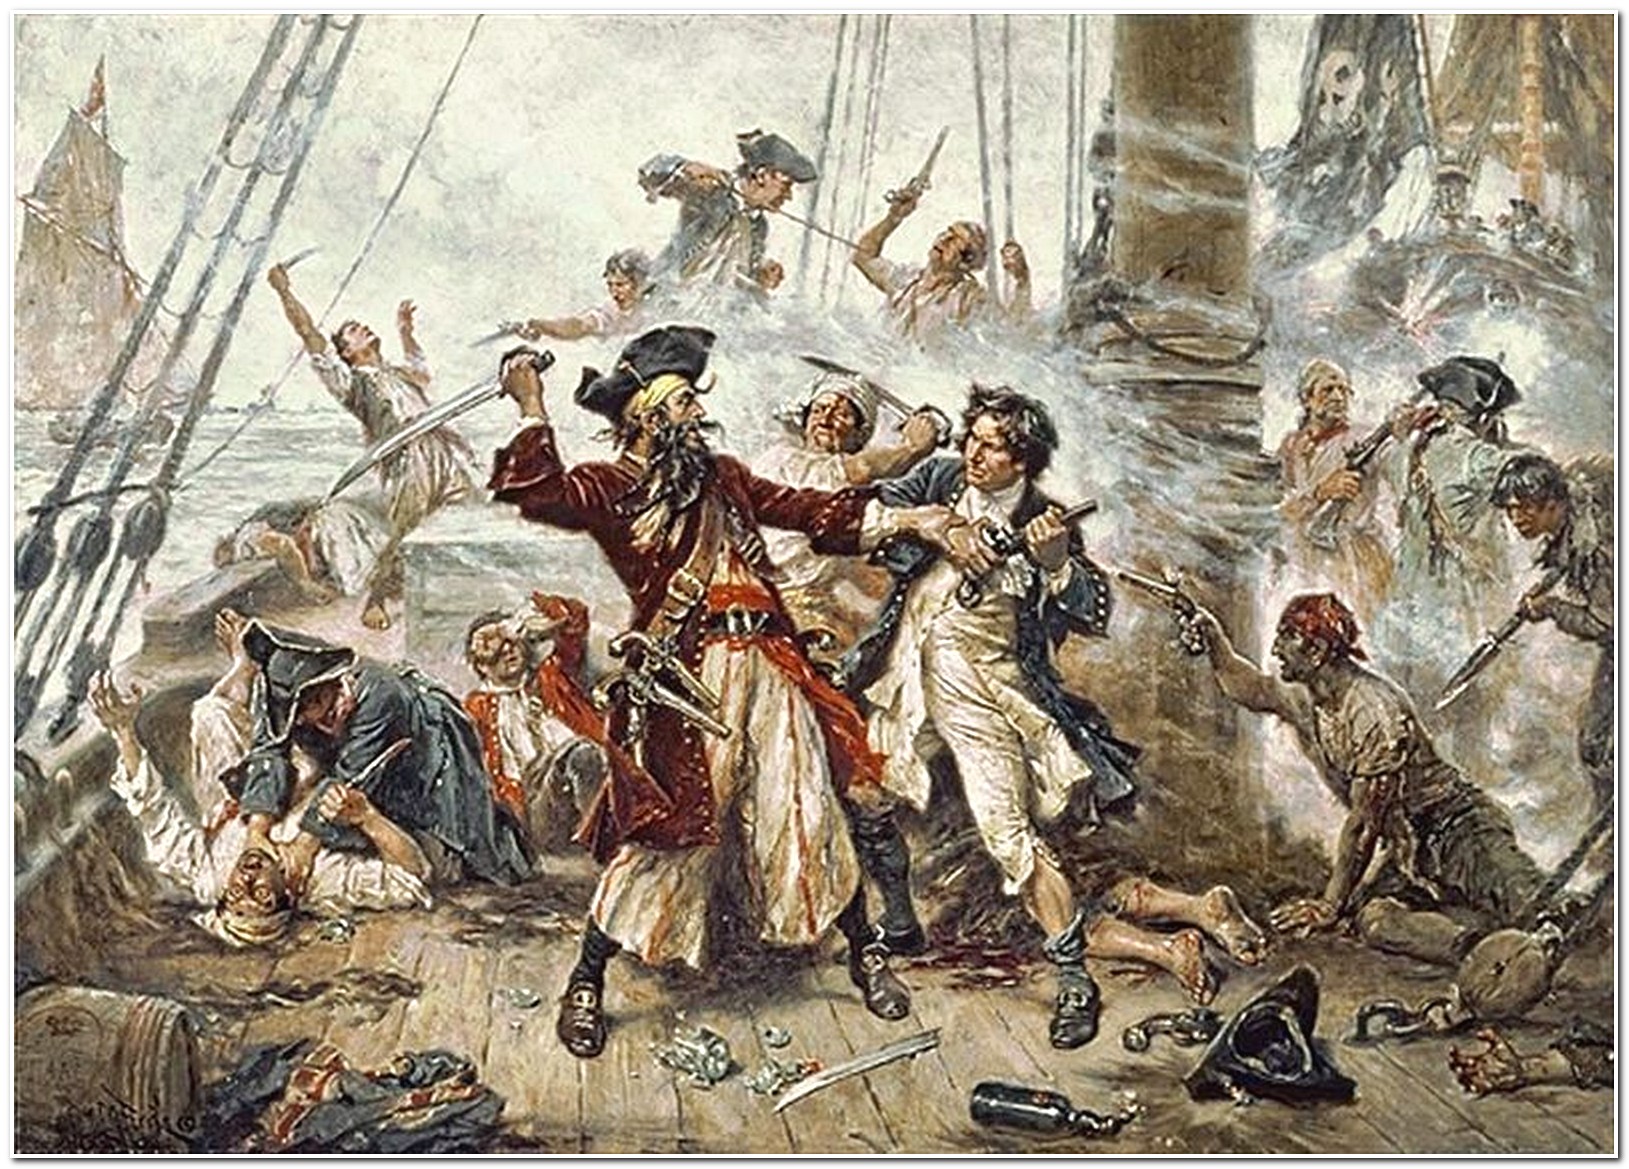 The Real Pirates of the Caribbean